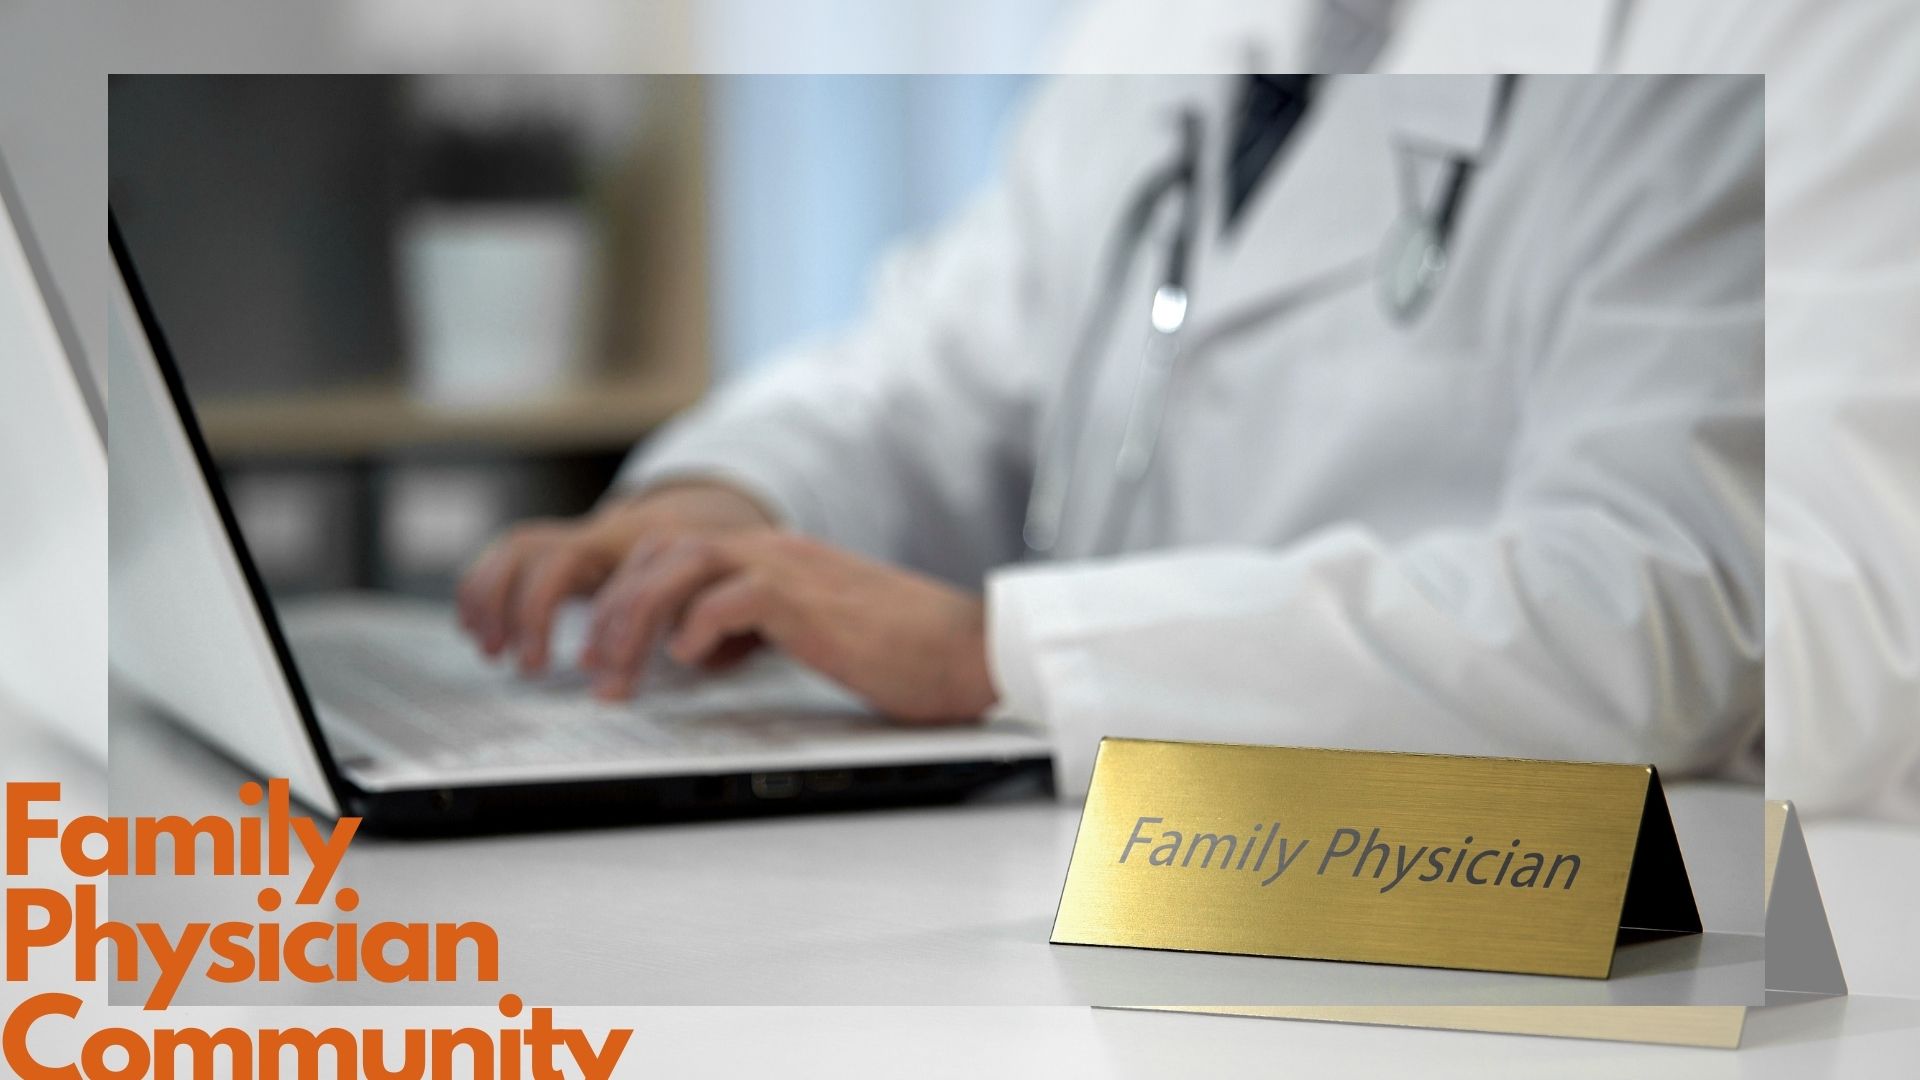 Family Physician Community